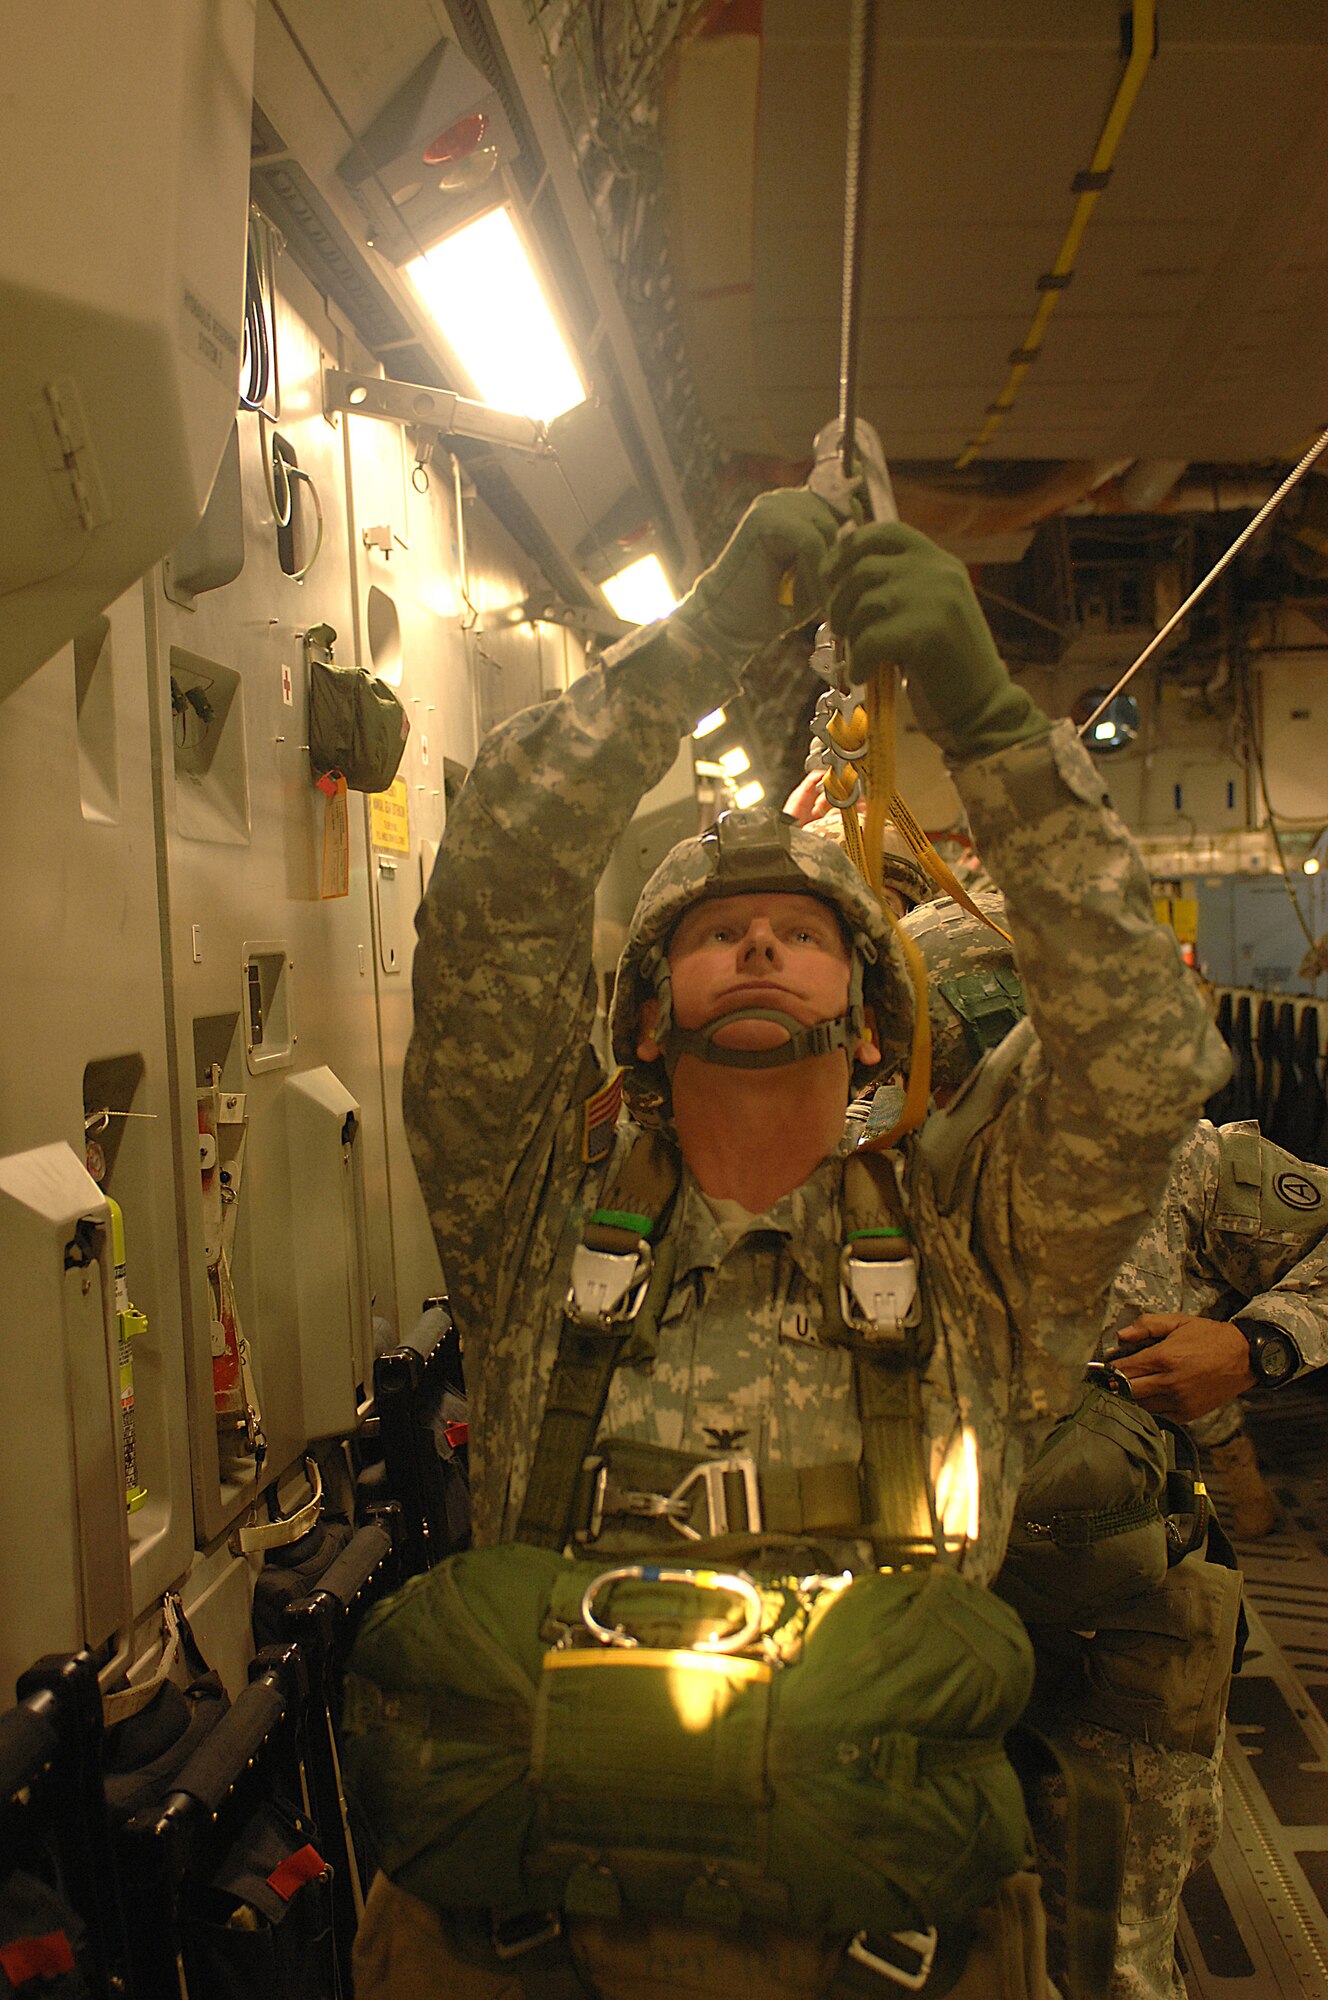 U.S. Army paratroopers from the 20th Engineering Brigade, 101st Airborne Division, Fort Campbell, Ky., clip onto a static line inside a Charleston AFB C-17 aircraft for an air drop into Cairo, Egypt, Nov. 10 as part of Exercise Bright Star 2007. (U.S Air Force photo/Staff Sgt. Aaron Allmon)